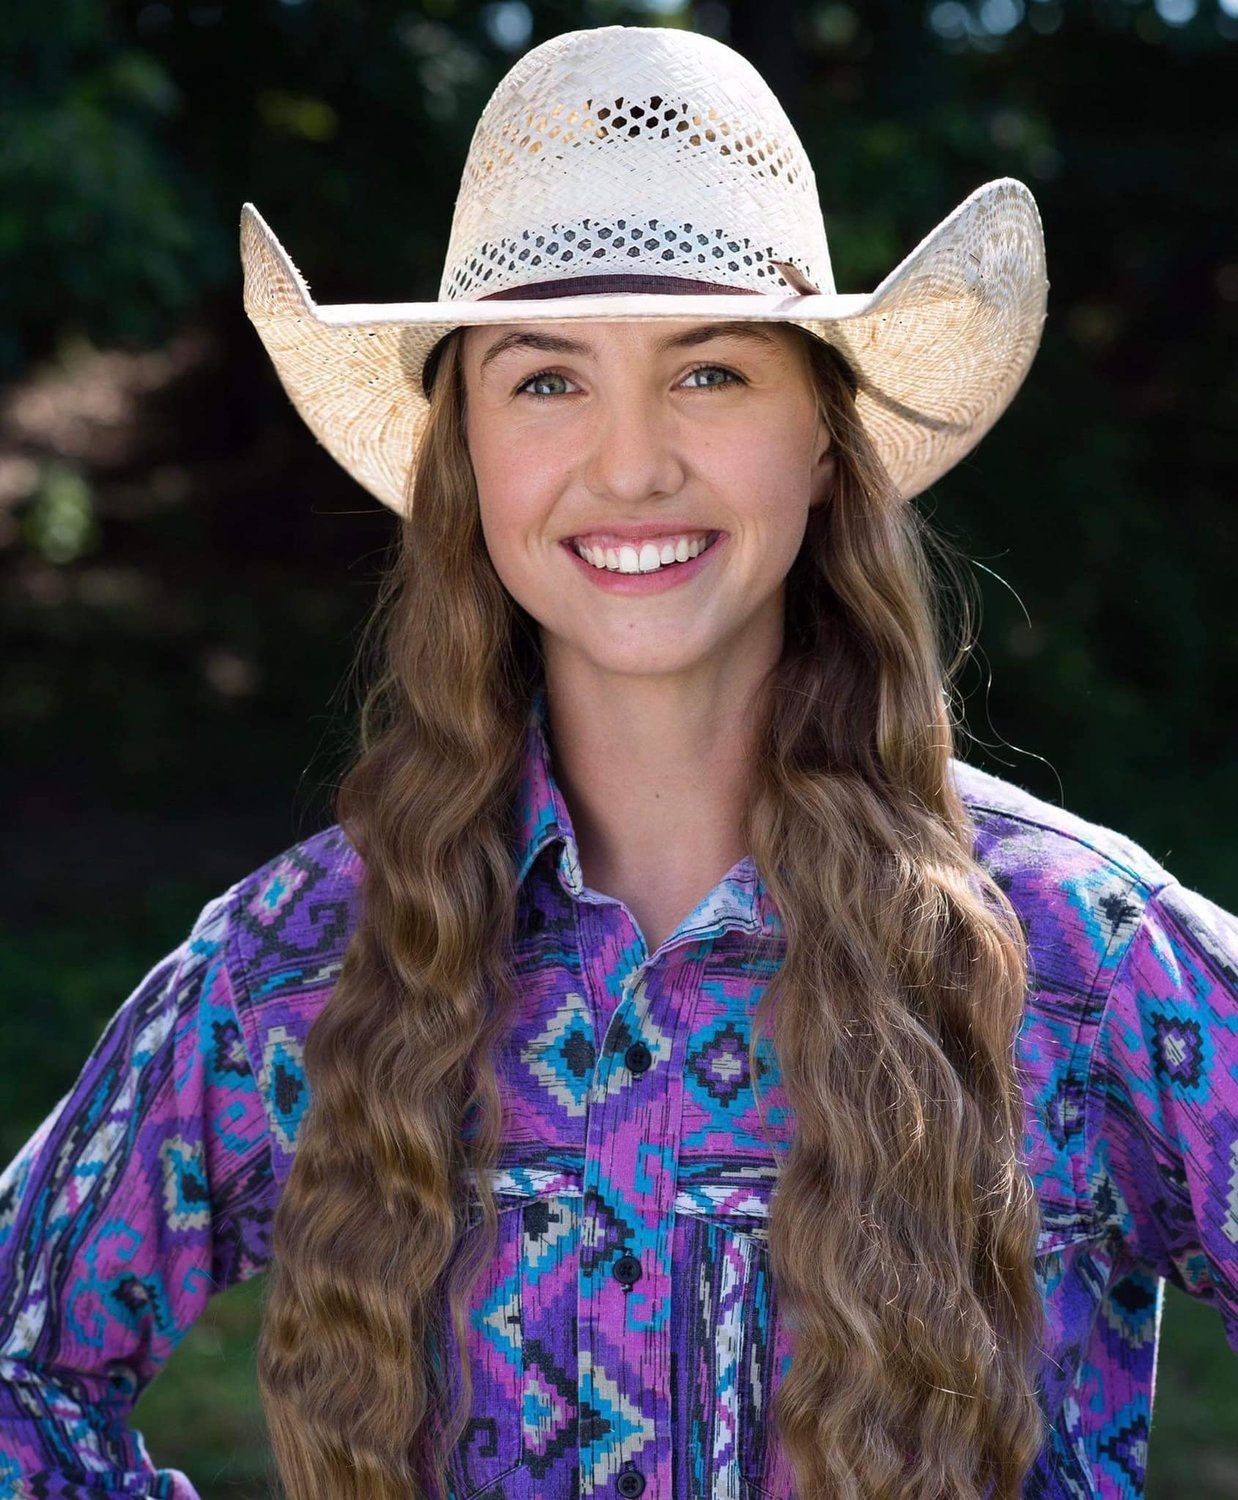 Jordan Halverson from the Netflix series “How to be a Cowboy” will compete in Bay Minette at Bucking with Claus event.